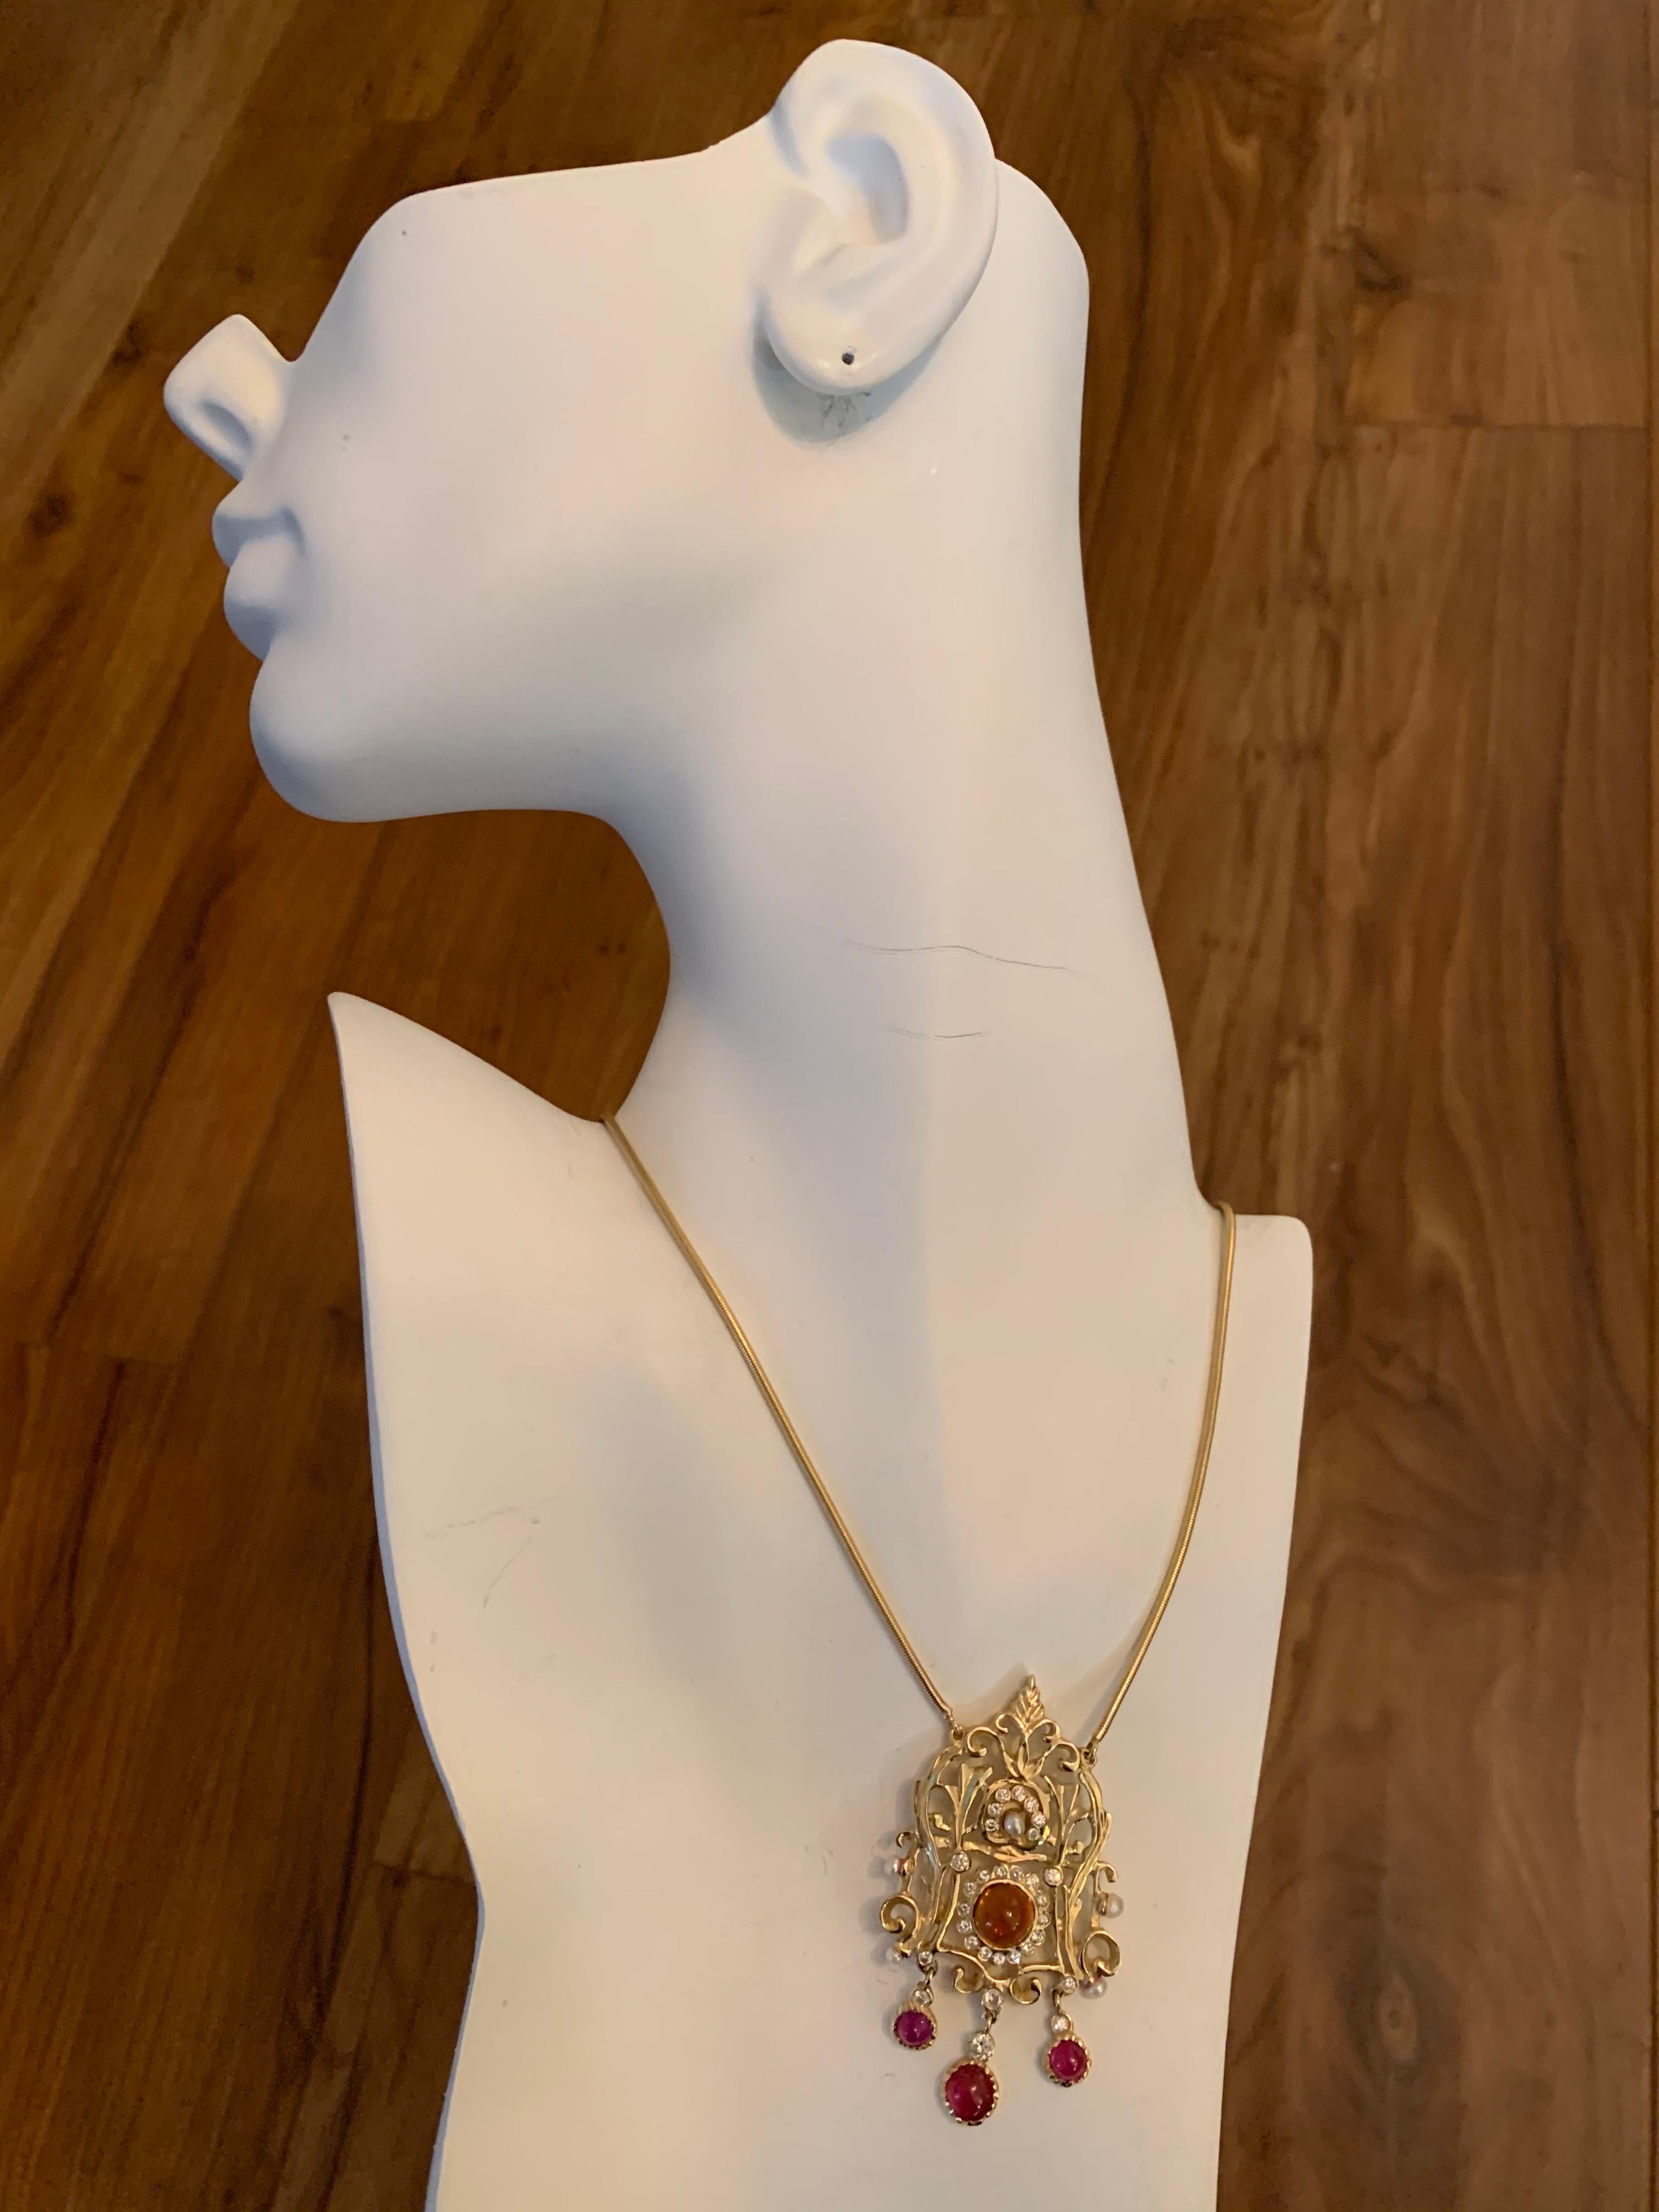 Retro 14k Yellow Gold Pendant 6 Carat Natural Diamond, Ruby, Quartz Gemstone Circa 1960. 

The piece is set with 30 Natural diamonds weighing approximately 1 carat (G-I, VS-I), 3 natural cabochons & 1 quartz weighing approximately 5 carats. 

The